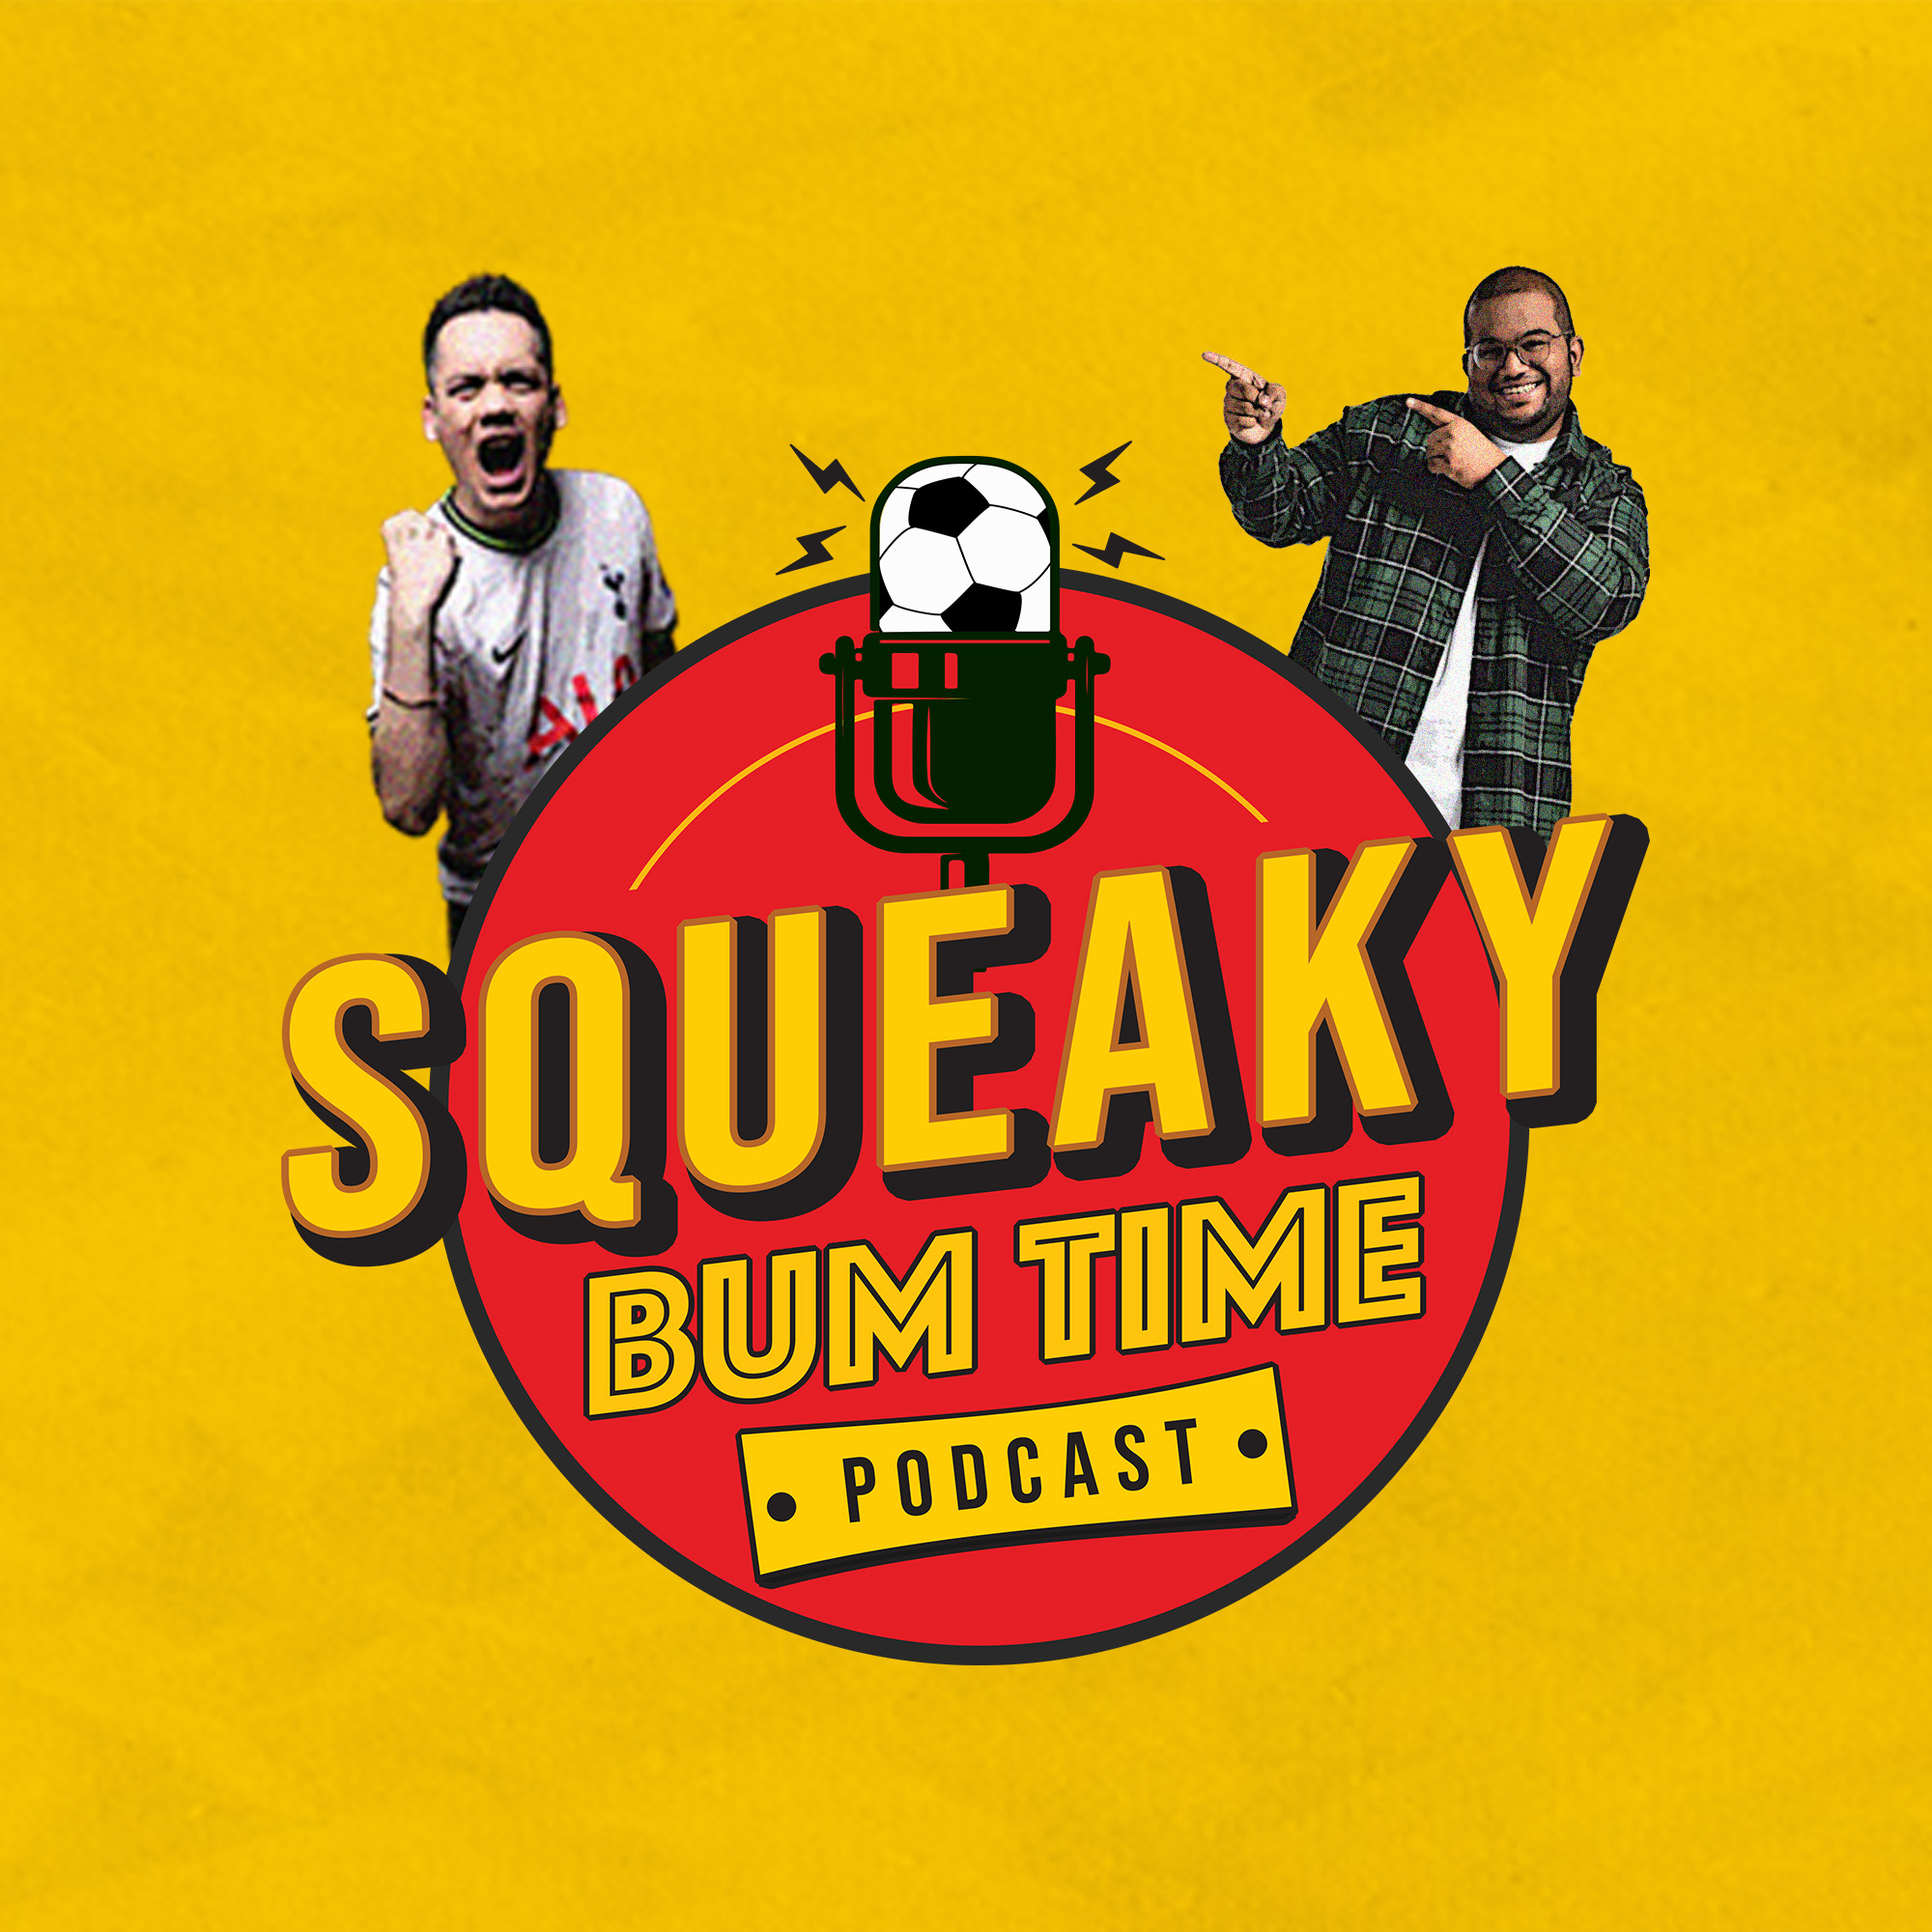 Squeaky Bum Time - SYOK Podcast [ENG]